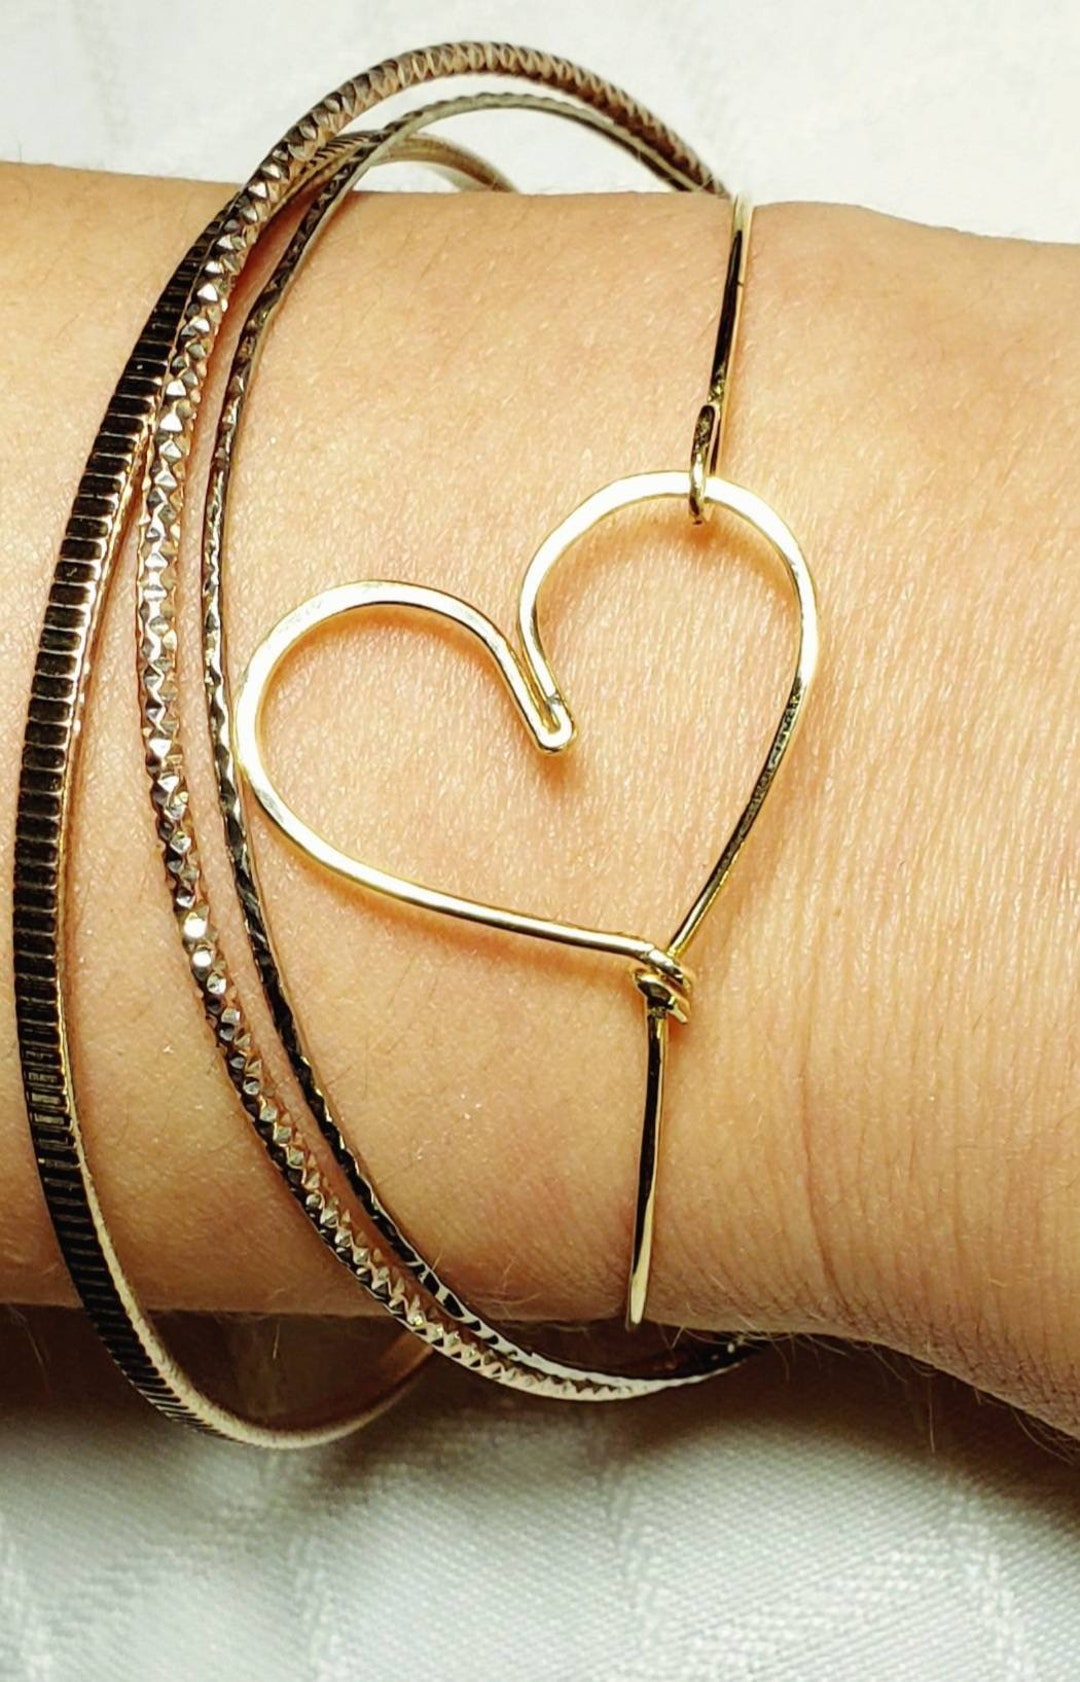 Amazon.com: 18K Gold Plated Small Open Heart Shaped Charm, Black Womens  Friendship Bracelet, Pull Adjustable Kindred Cord Thread, Handmade. Perfect  Small Gift Sets (10% Promo) : Handmade Products